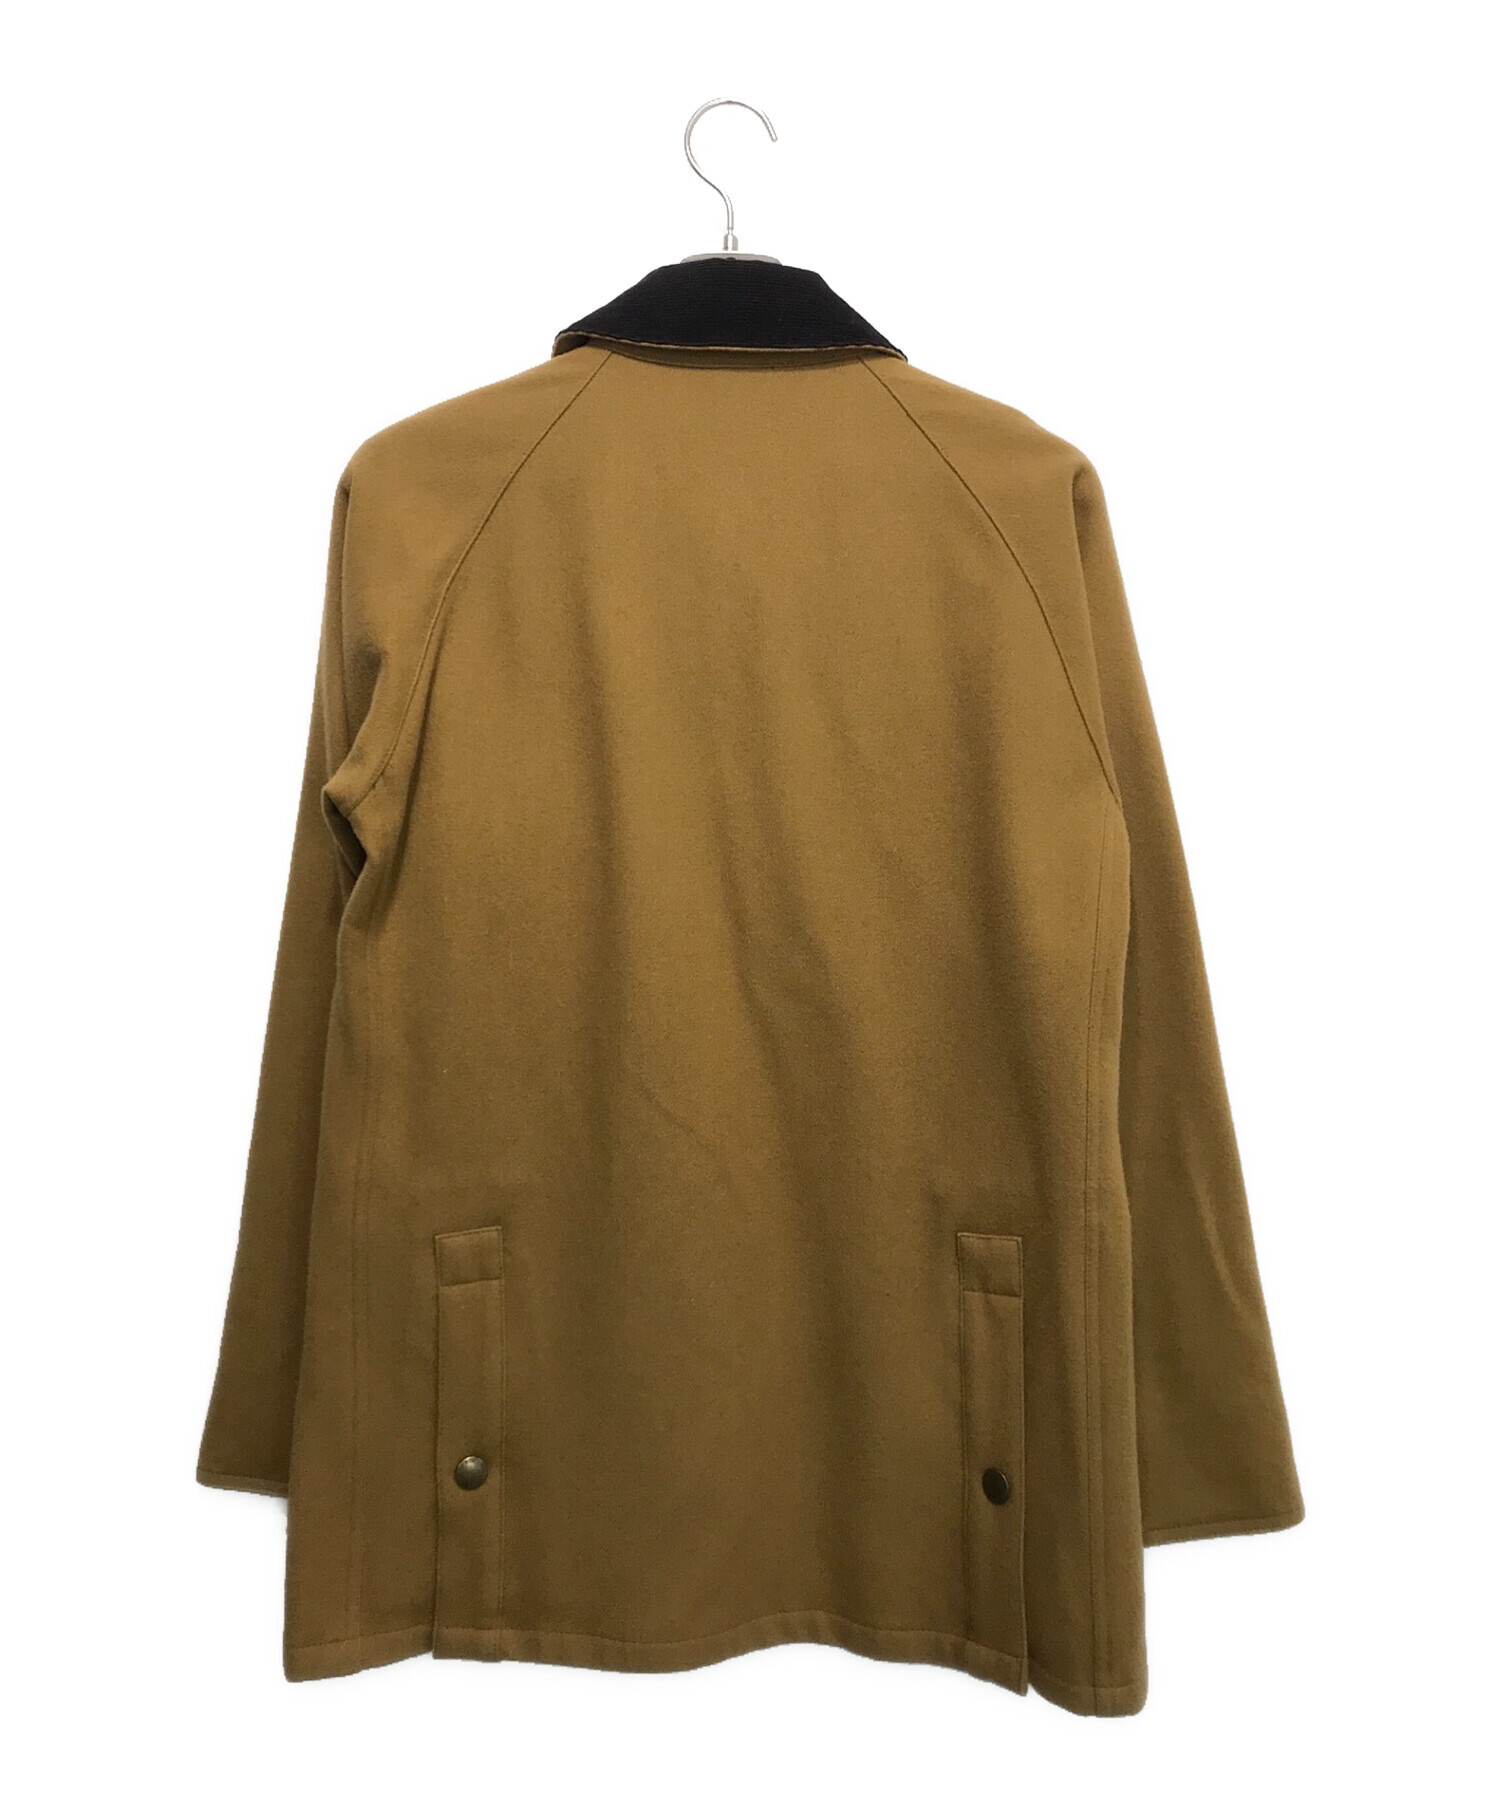 Barbour (バブアー) SL BEDALE BONDED WOOL ブラウン サイズ:36